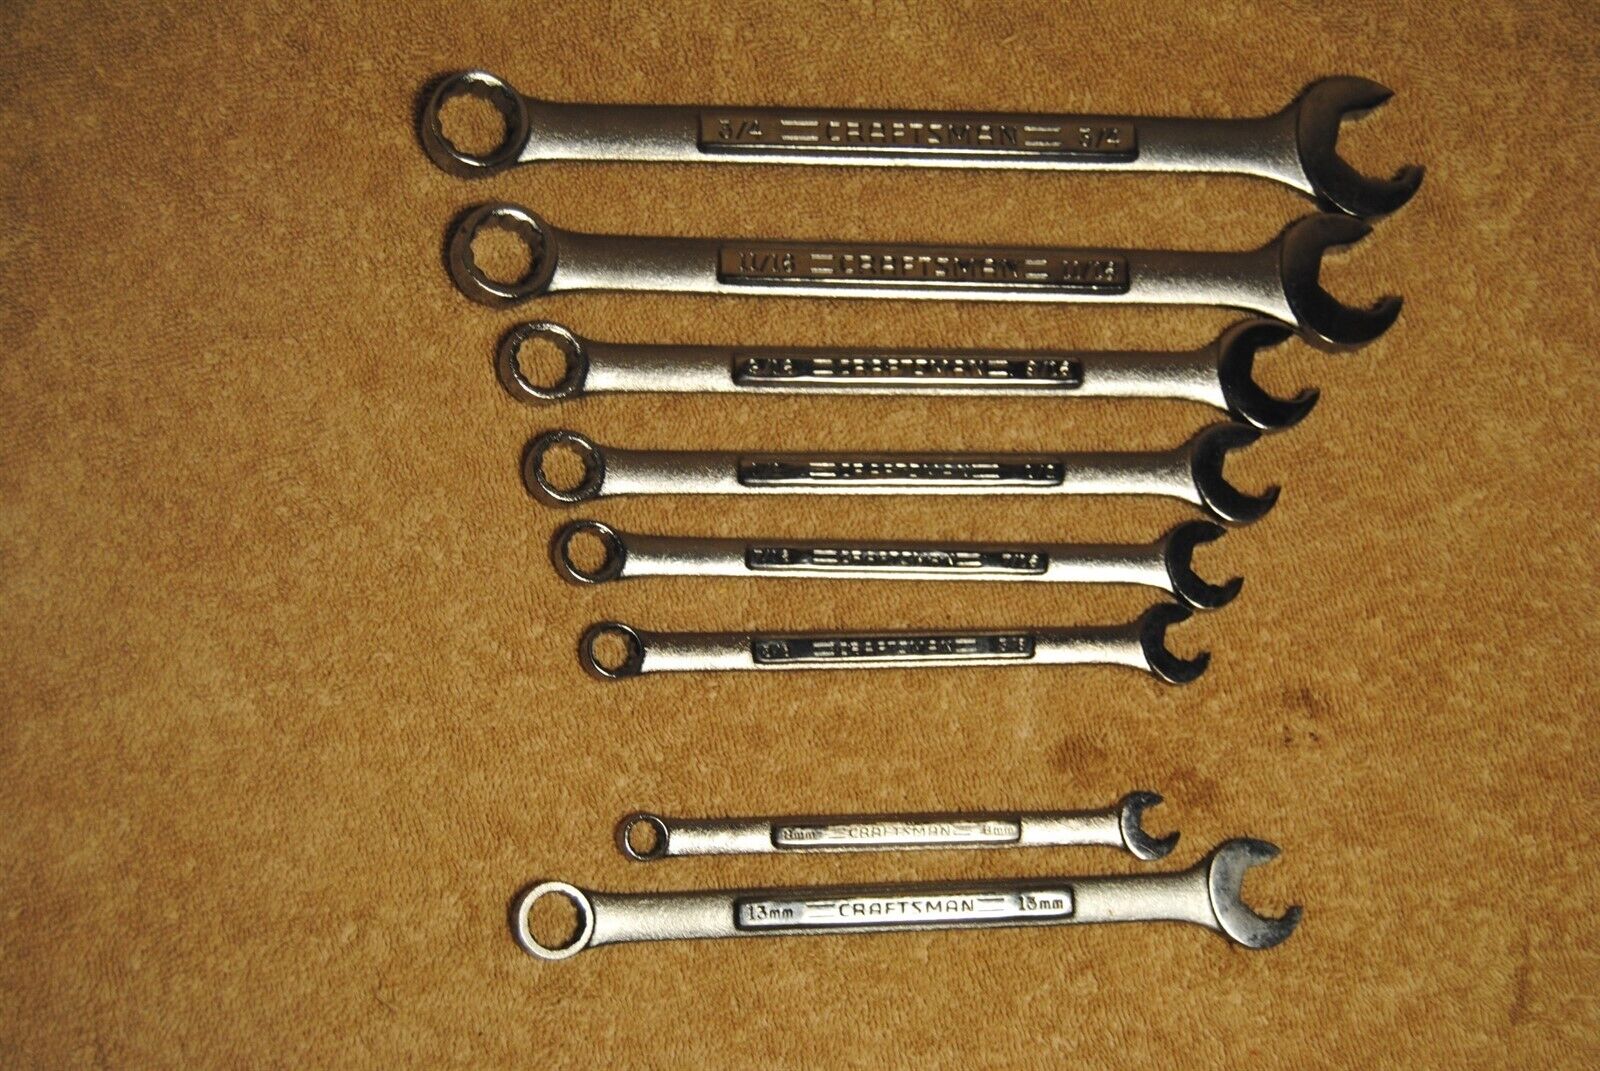 8 Vintage Craftsman Speed Combination Wrenches Lot 3/8 to 3/4 8mm 13mm